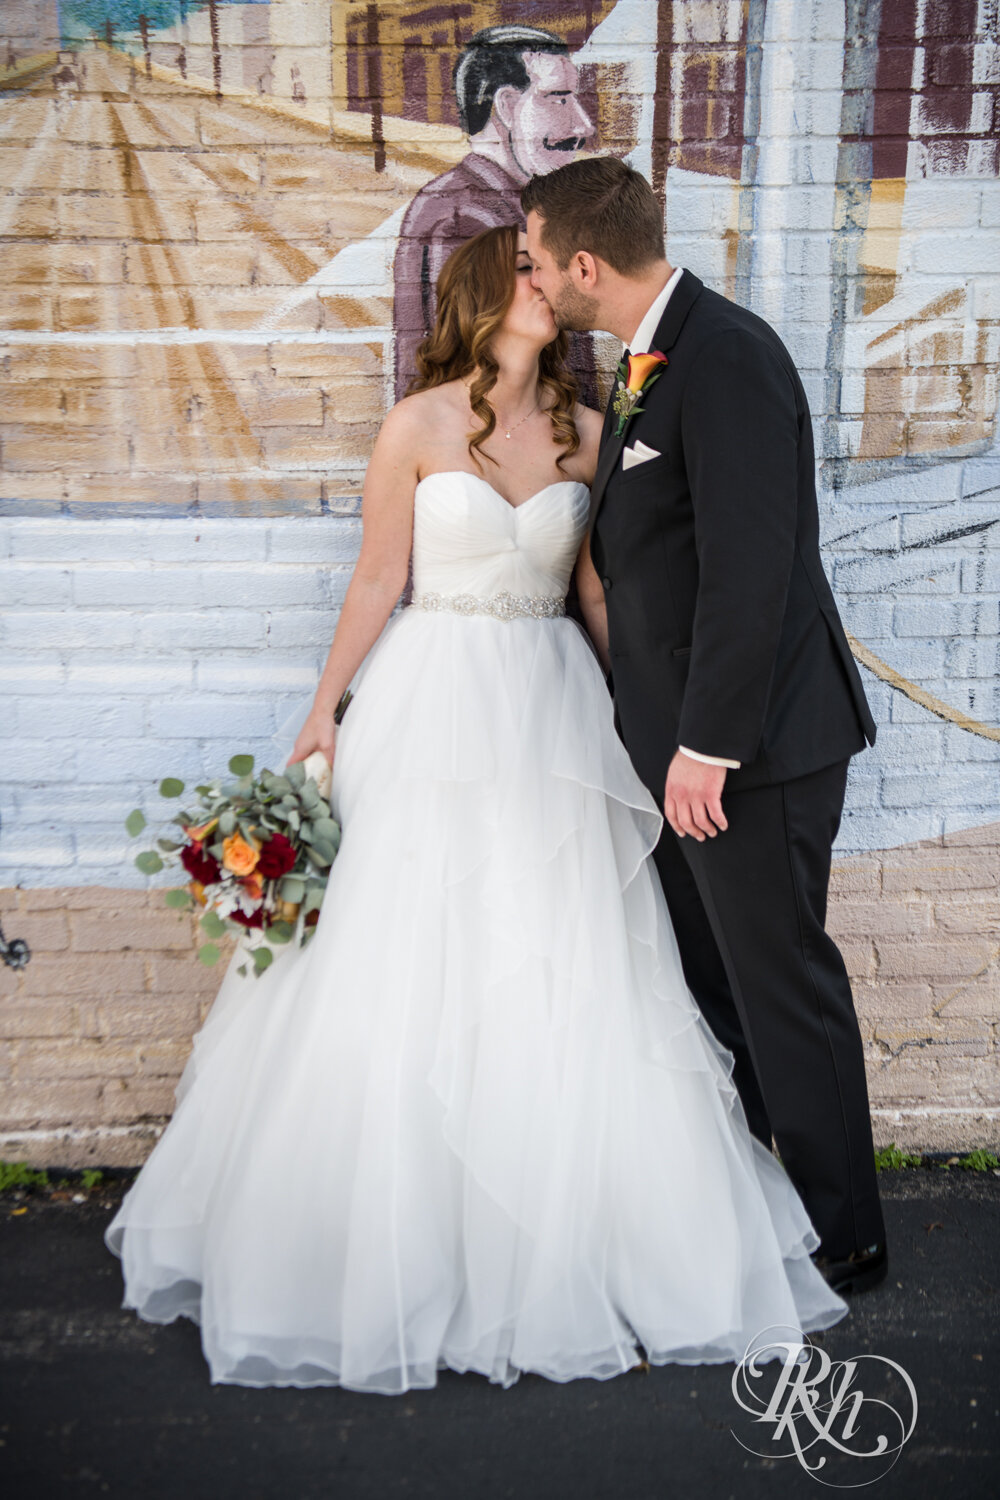 Bride and groom kissing in front of mural in Otsego, Minnesota on sunny wedding day.